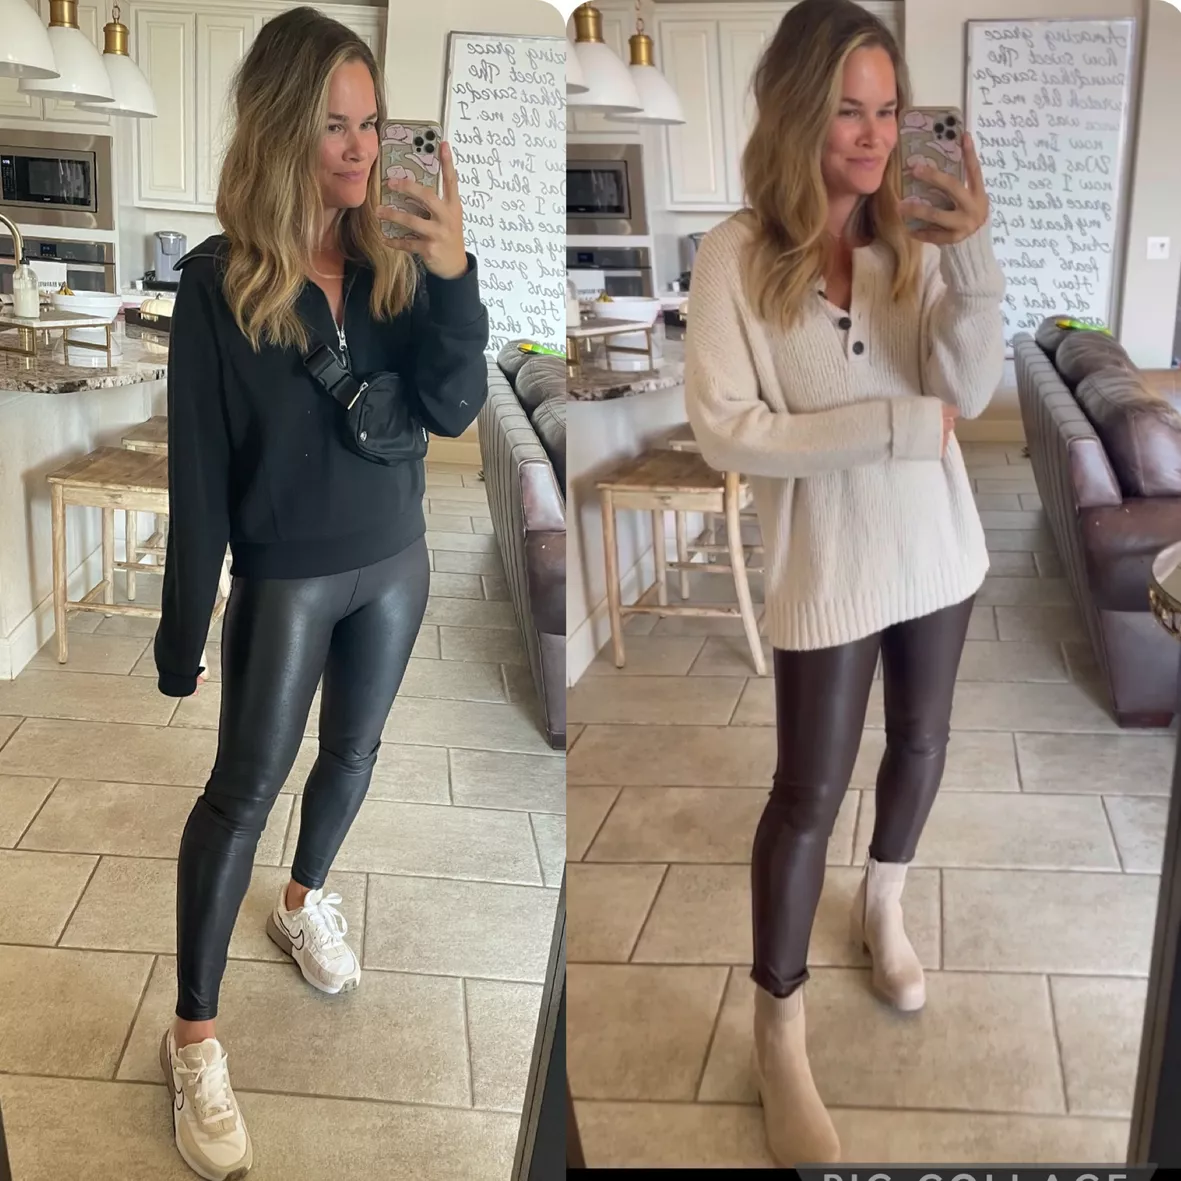 Comment leggings to receive a link in your messages along with